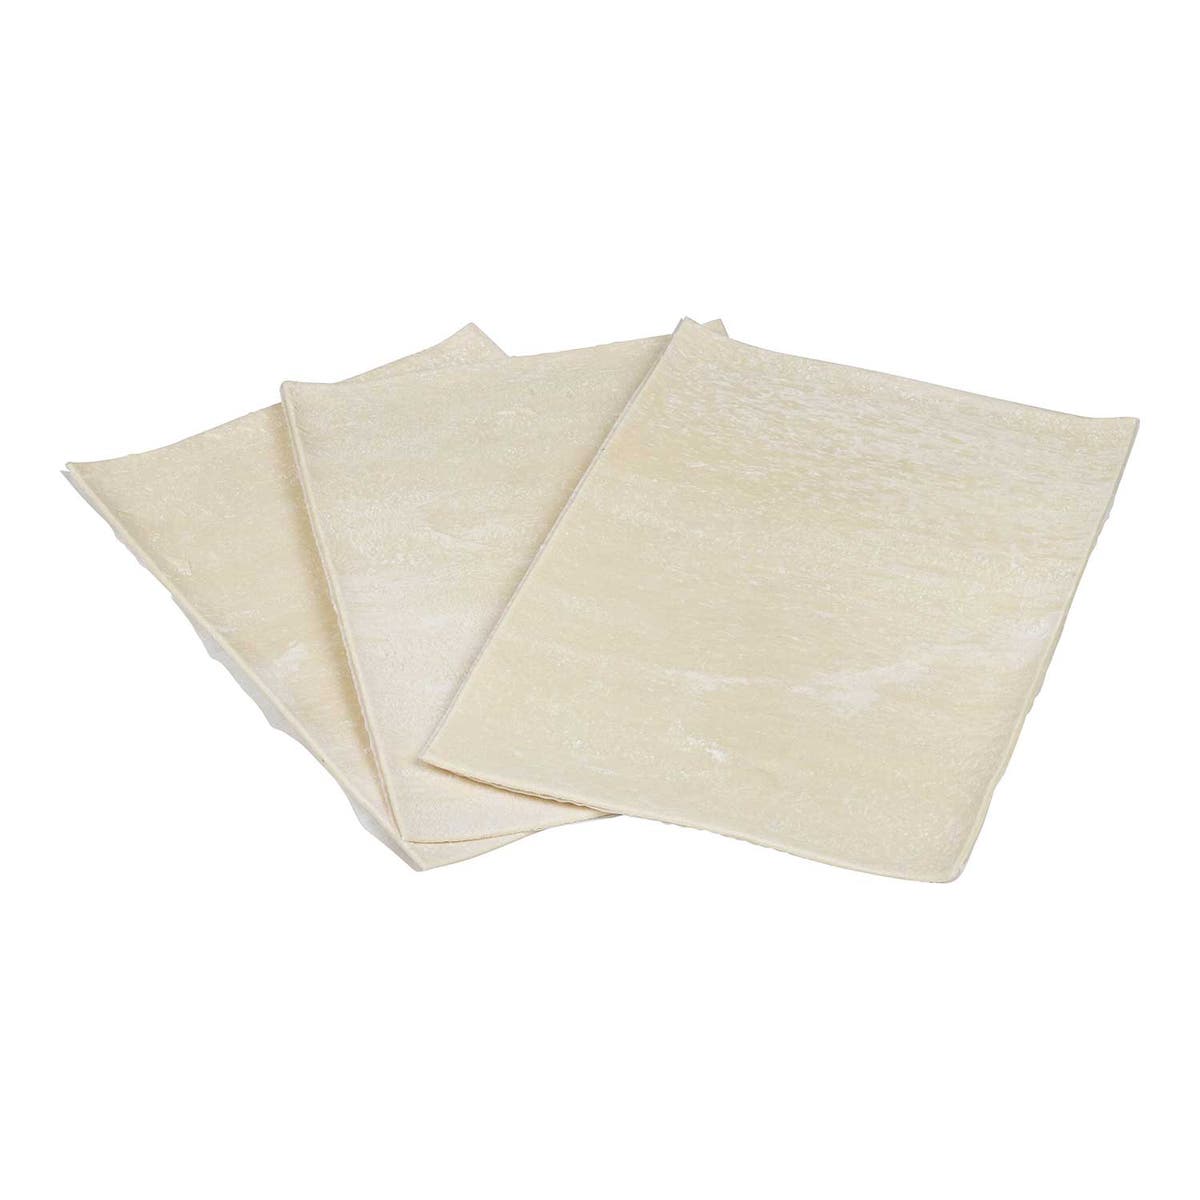 Puff Pastry Dough Sheets 10 x 15 - Buy Bulk or Wholesale – Bakers Authority